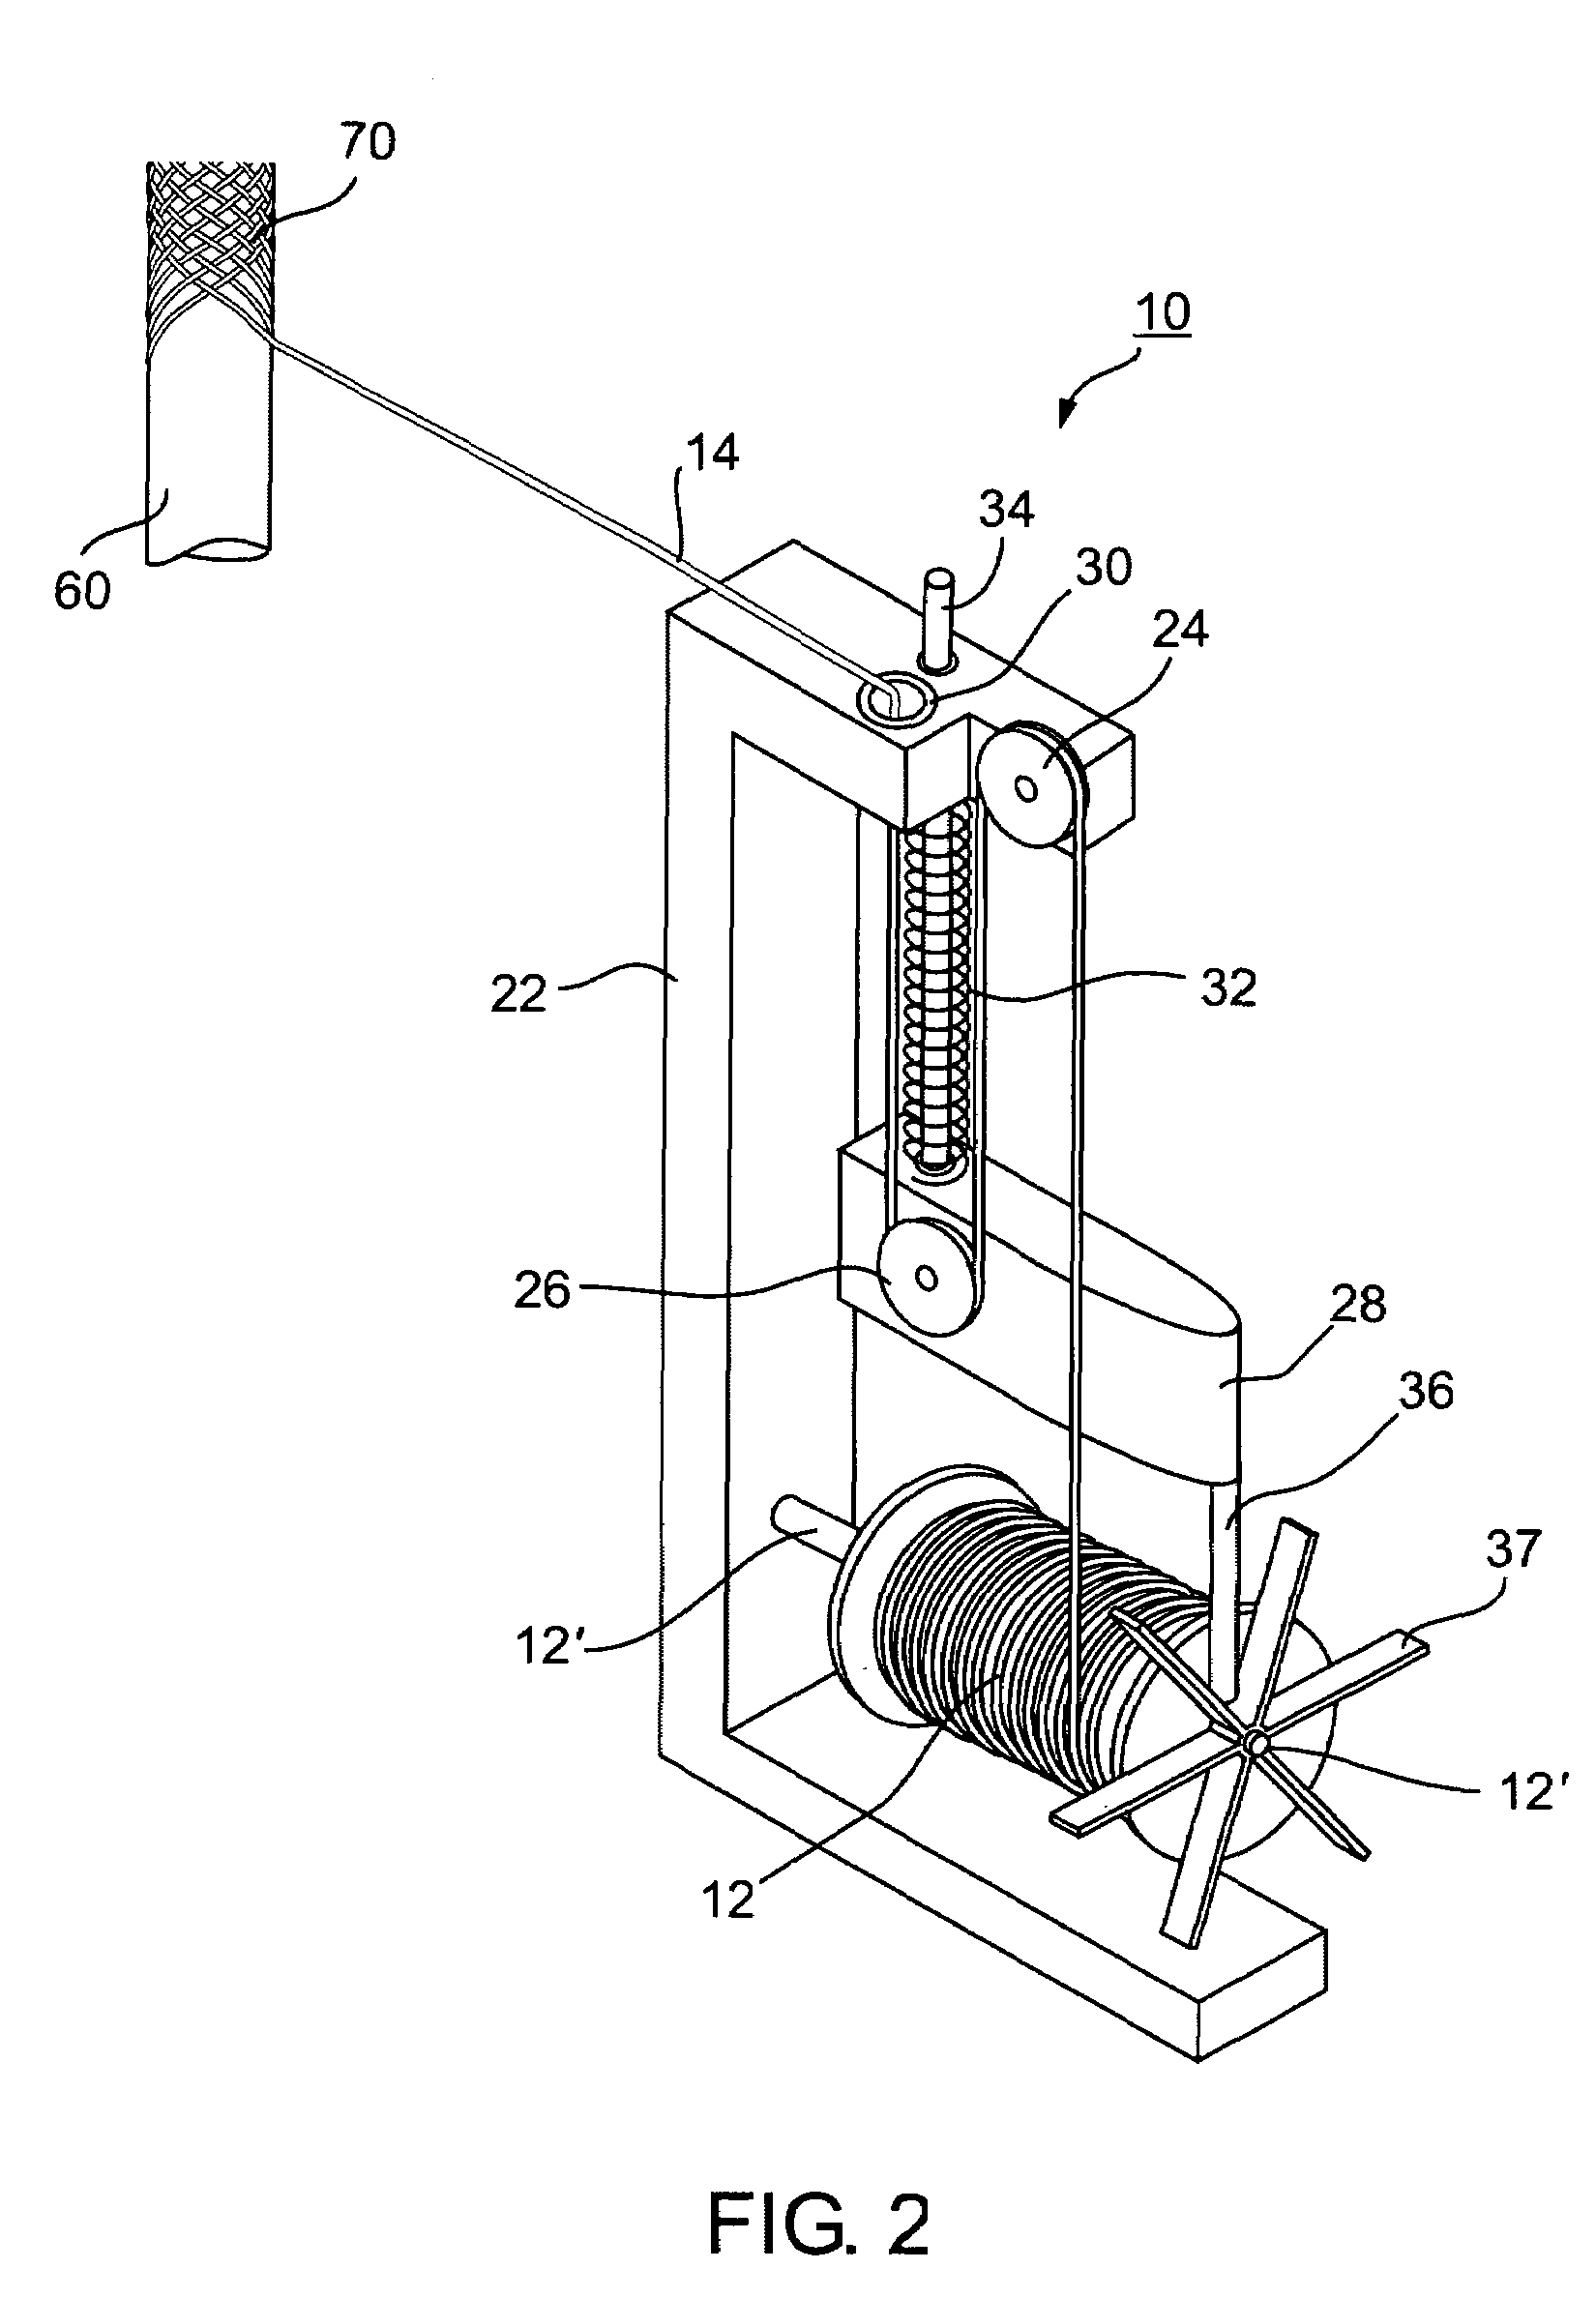 Mixed wire braided device with structural integrity